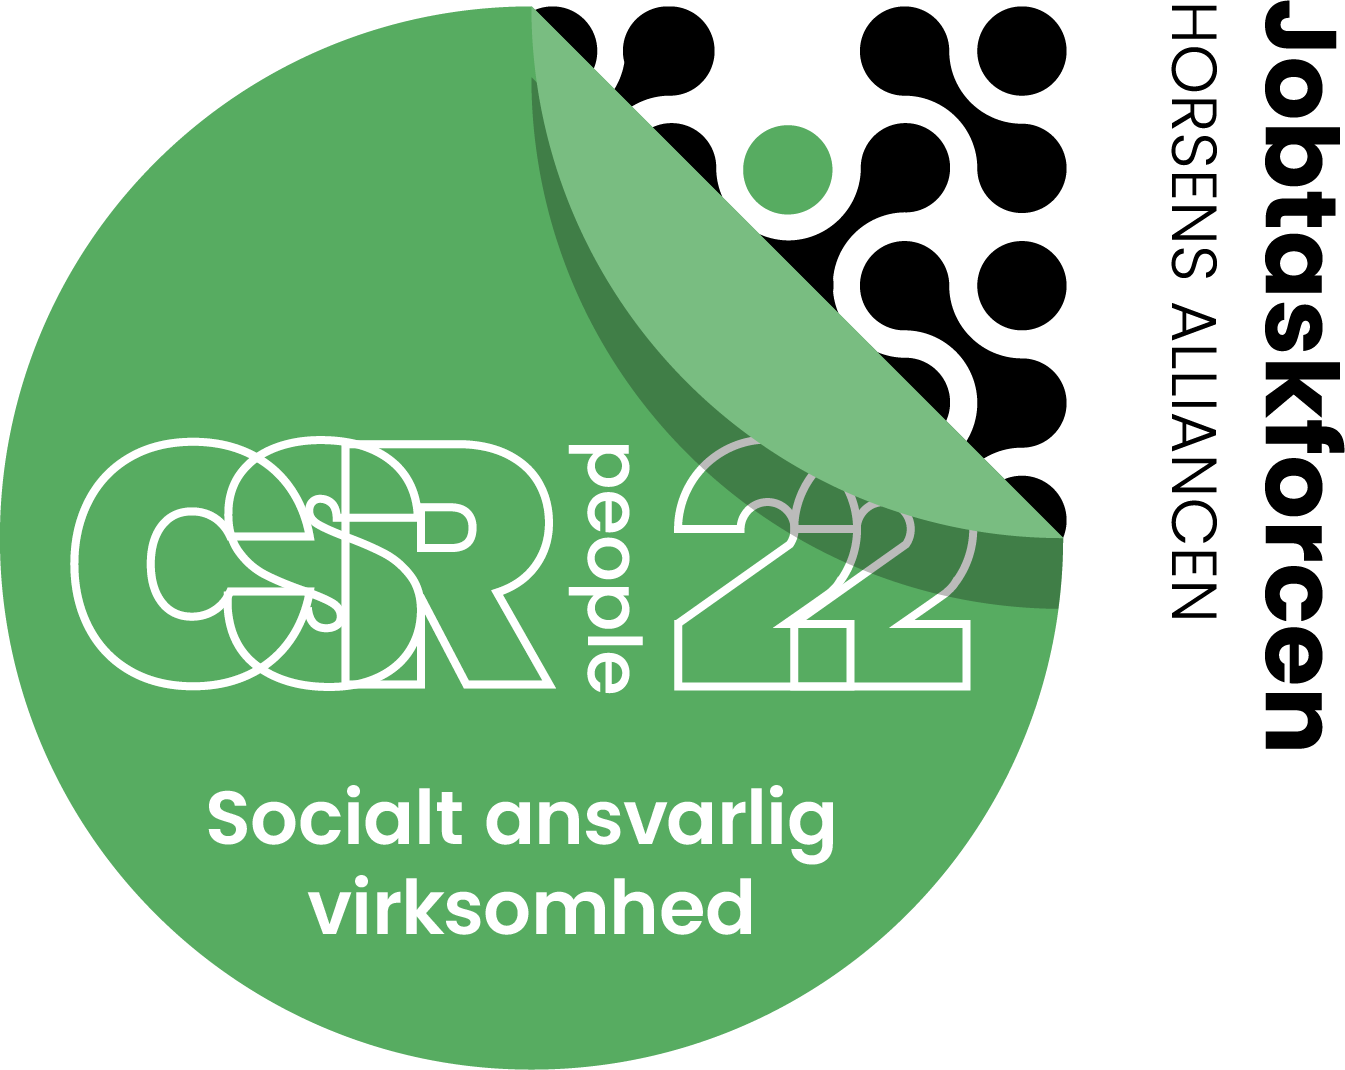 csrpeople